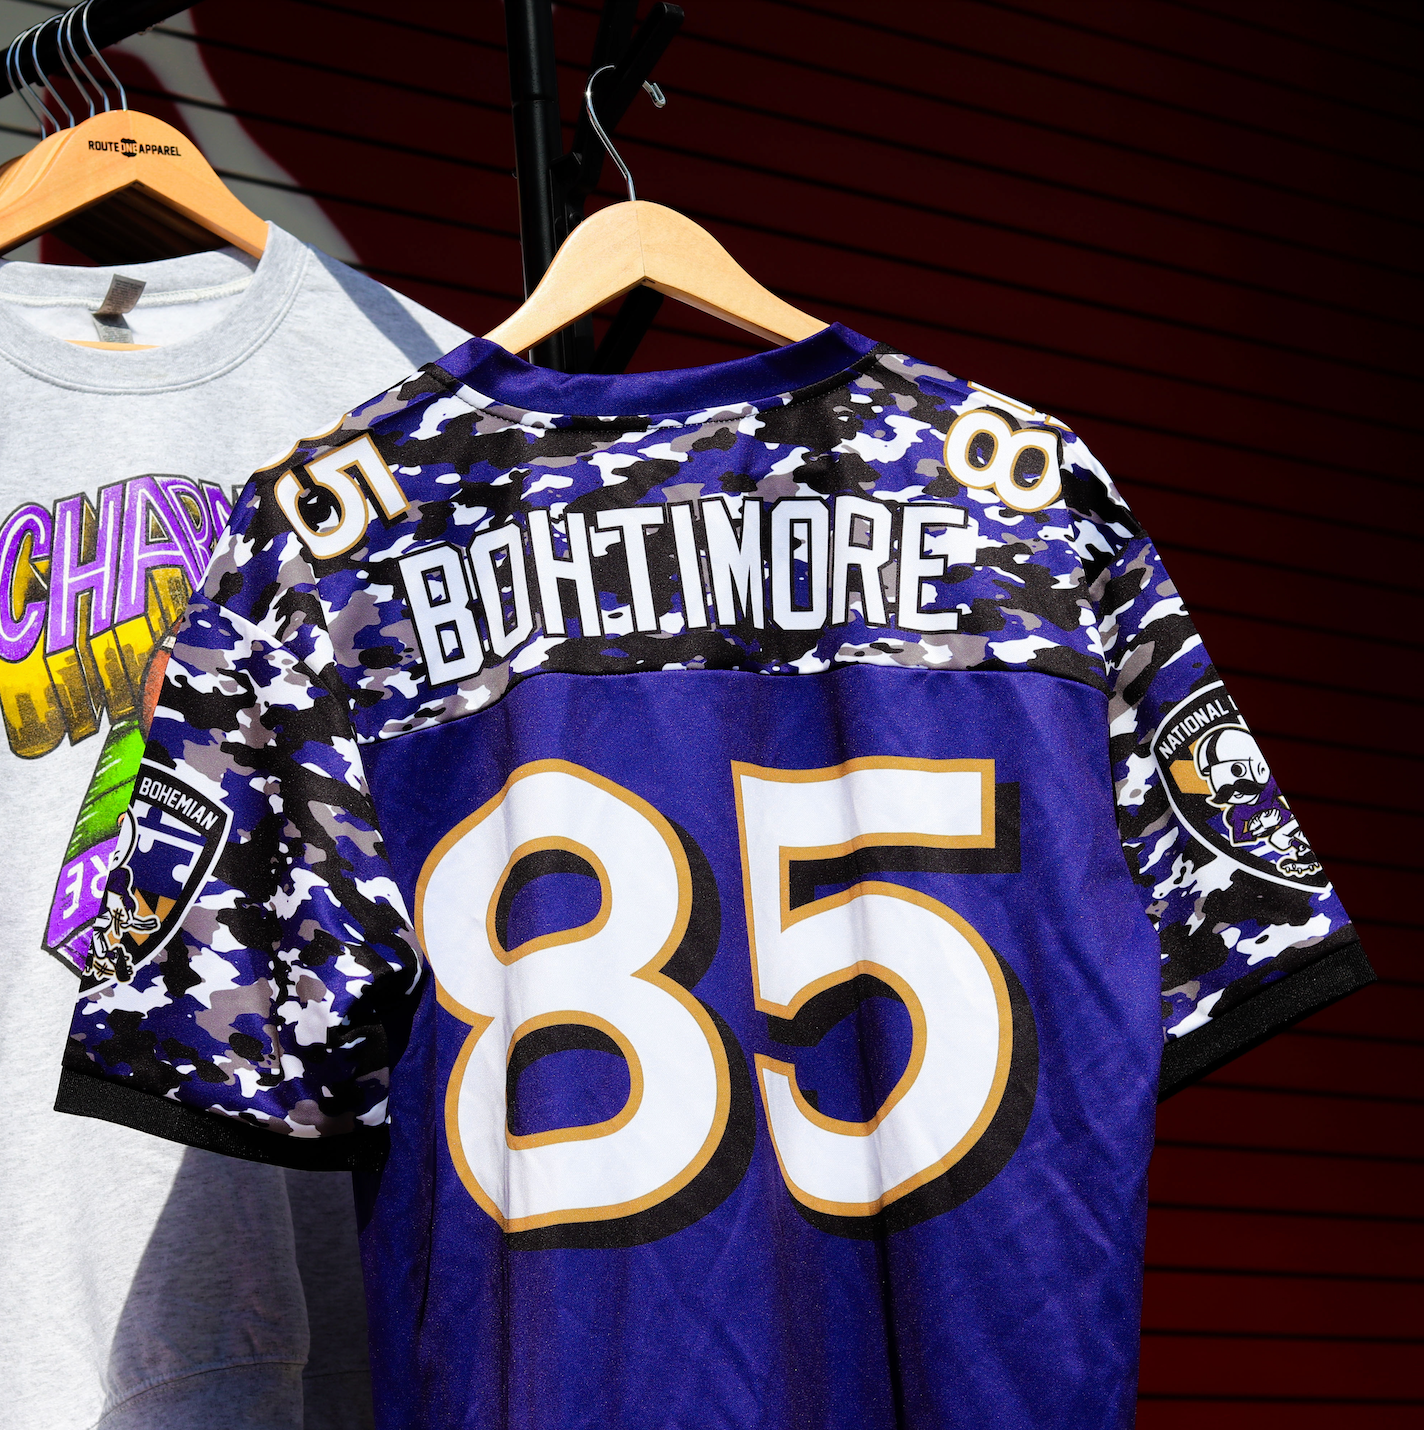 Bohtimore / Football Jersey - Route One Apparel